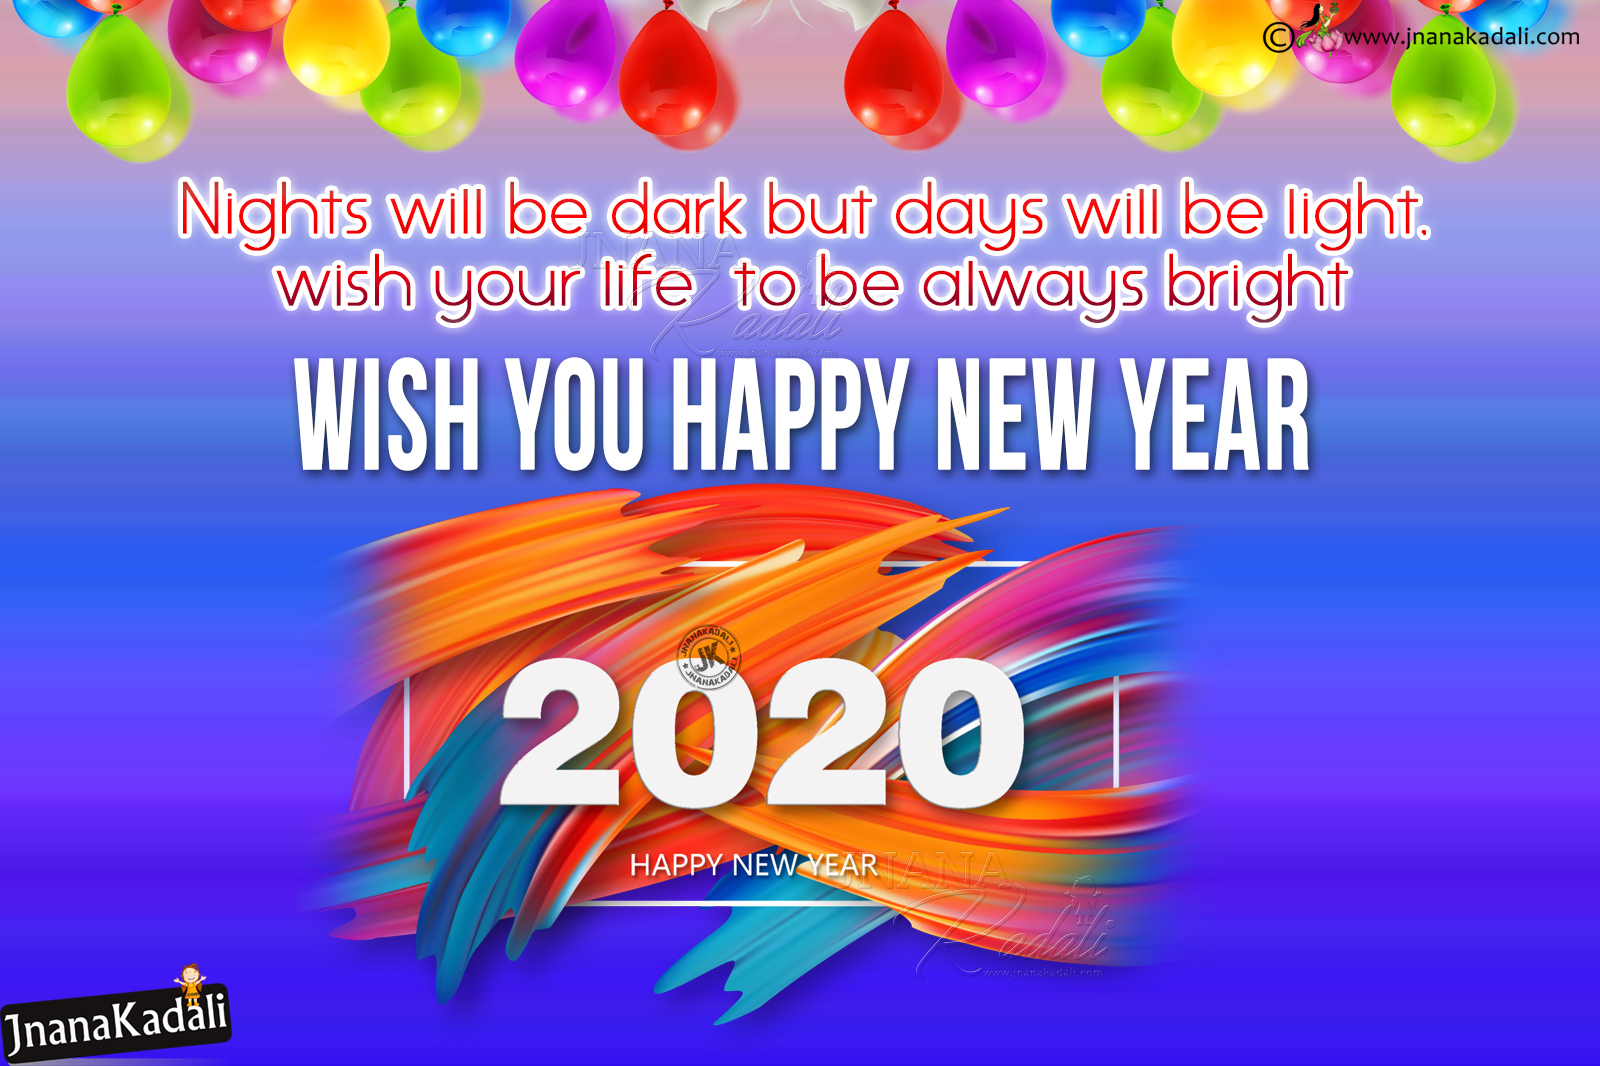 Happy New Year Greetings Wallpaper In English